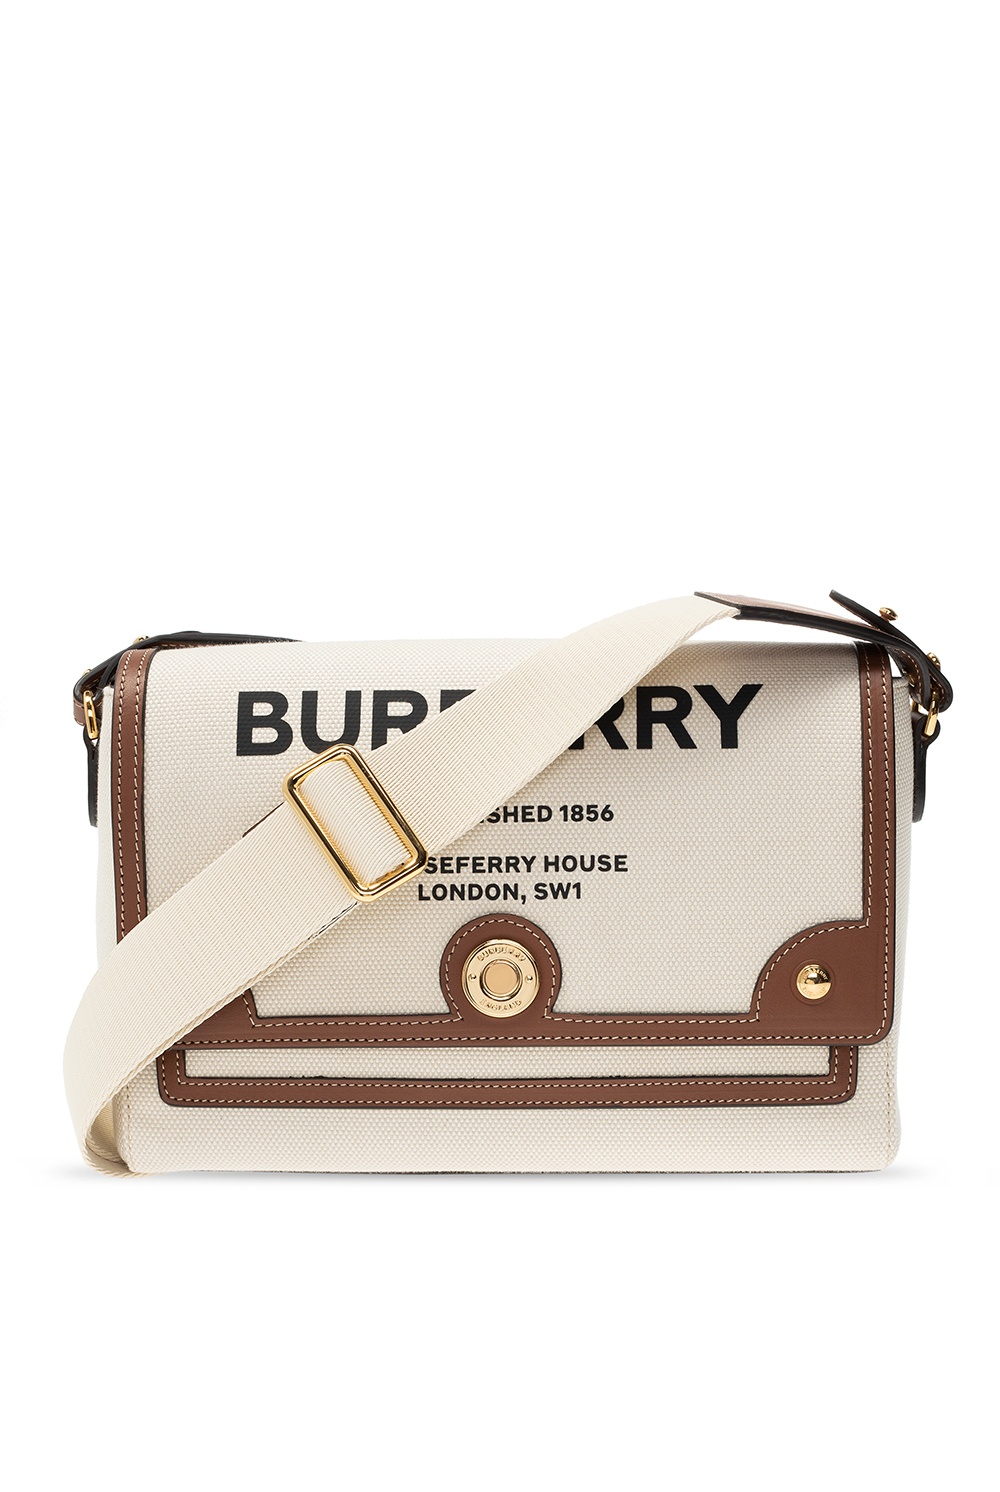 Burberry Classic Shoulder Bags for Women